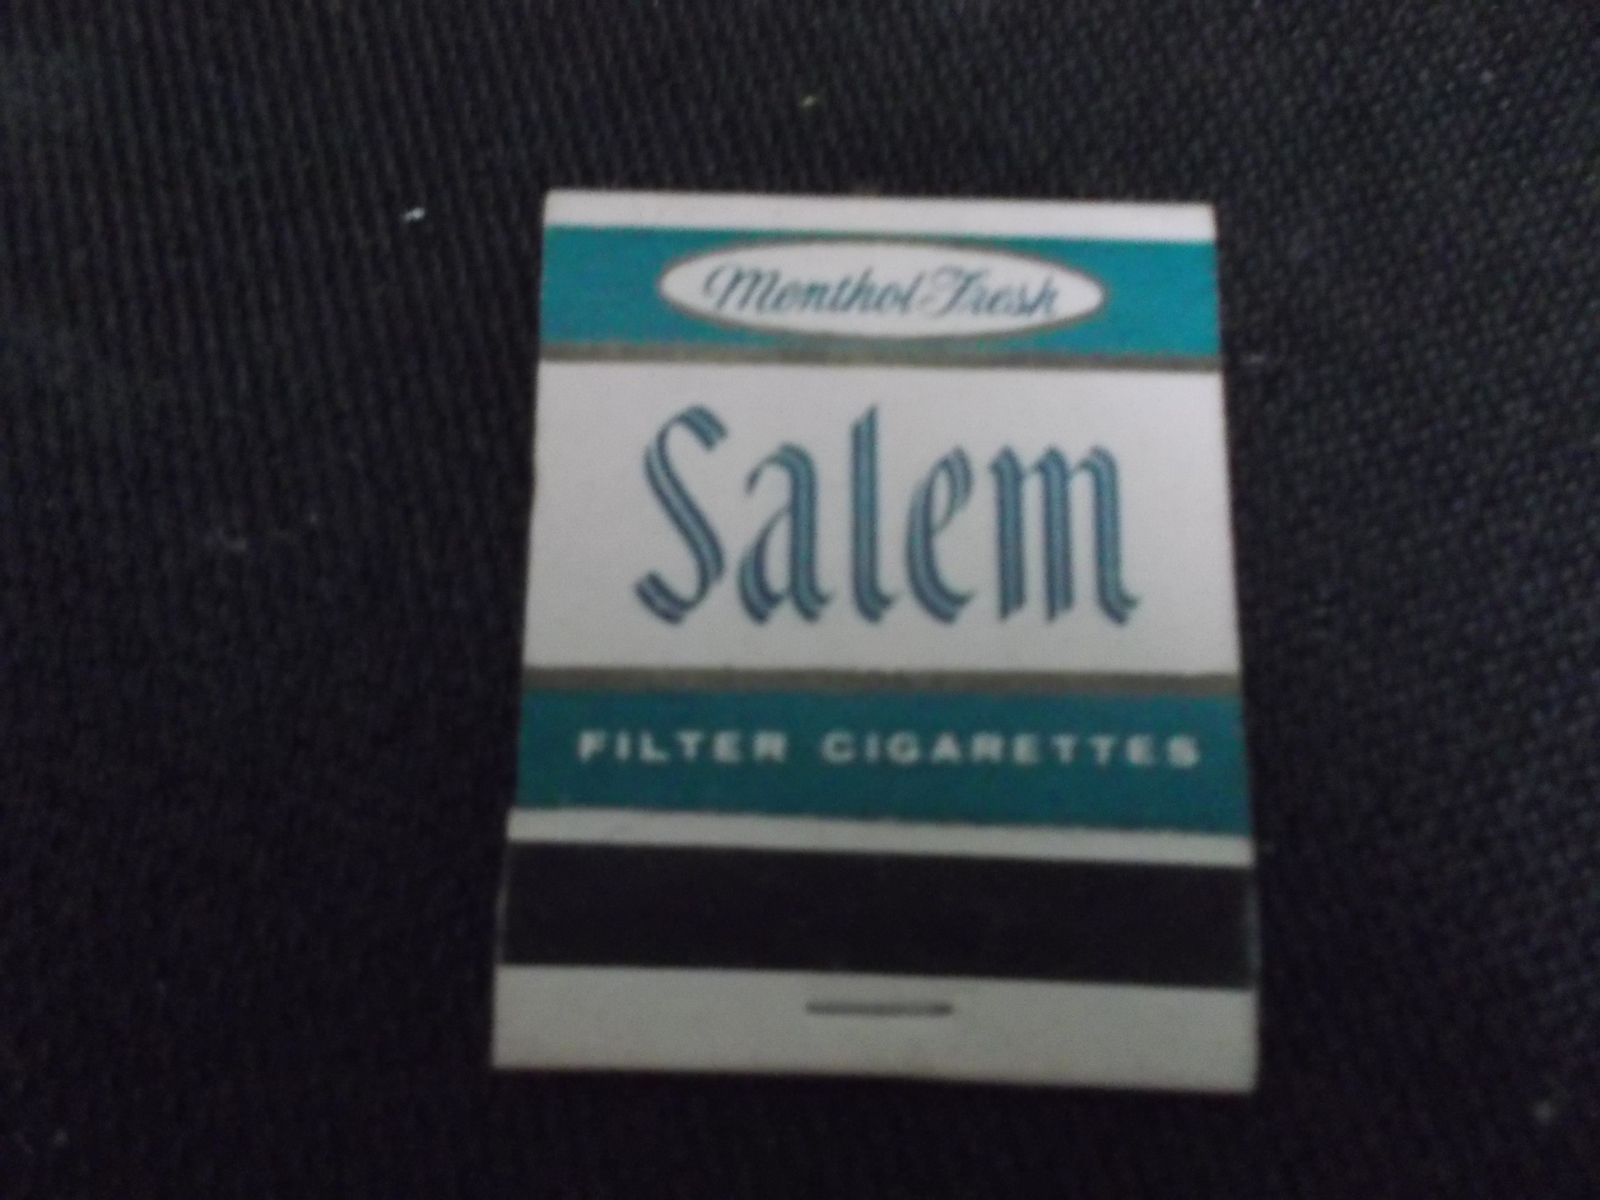 Primary image for Salem Cigarettes Advertising Full Match Book